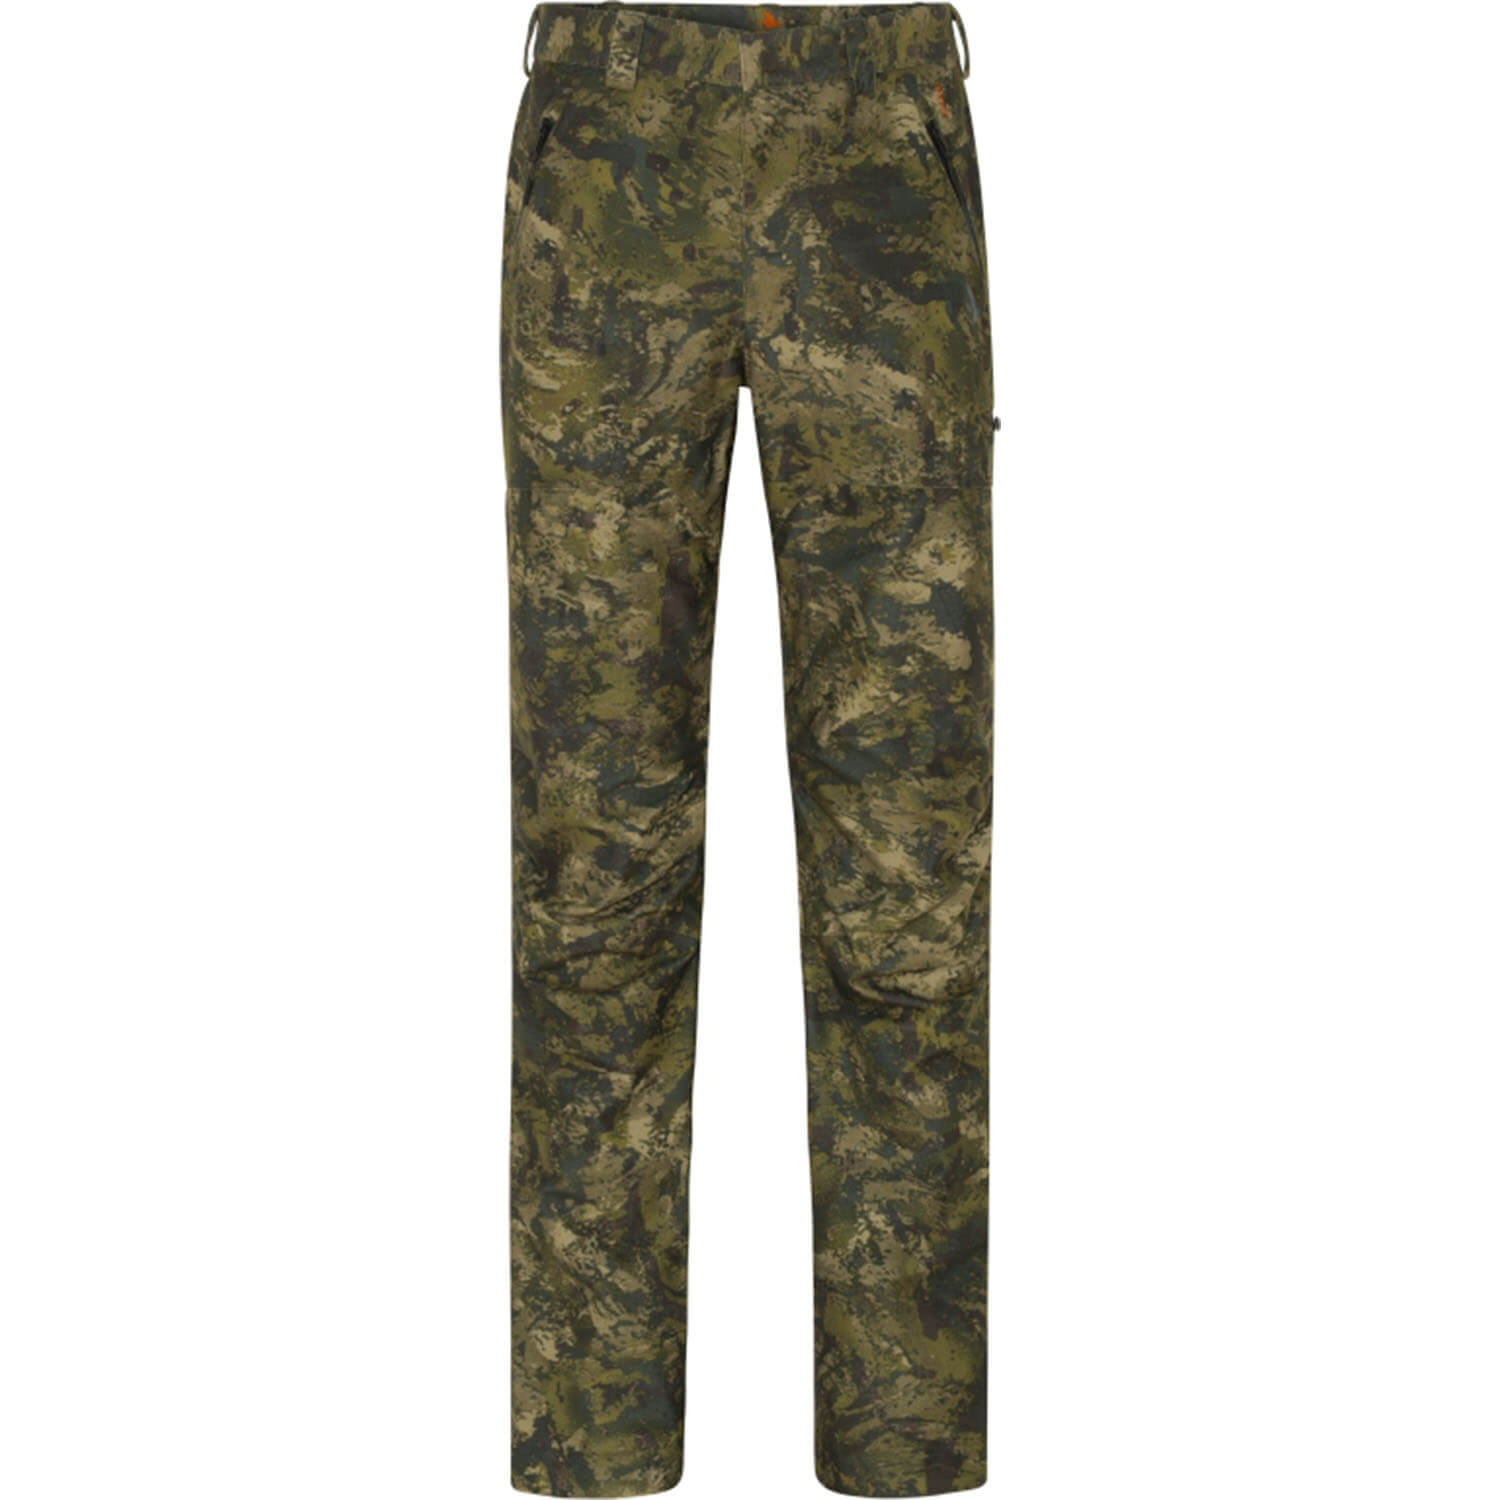 Seeland Trousers Avail (InVis) - Hunting Trousers